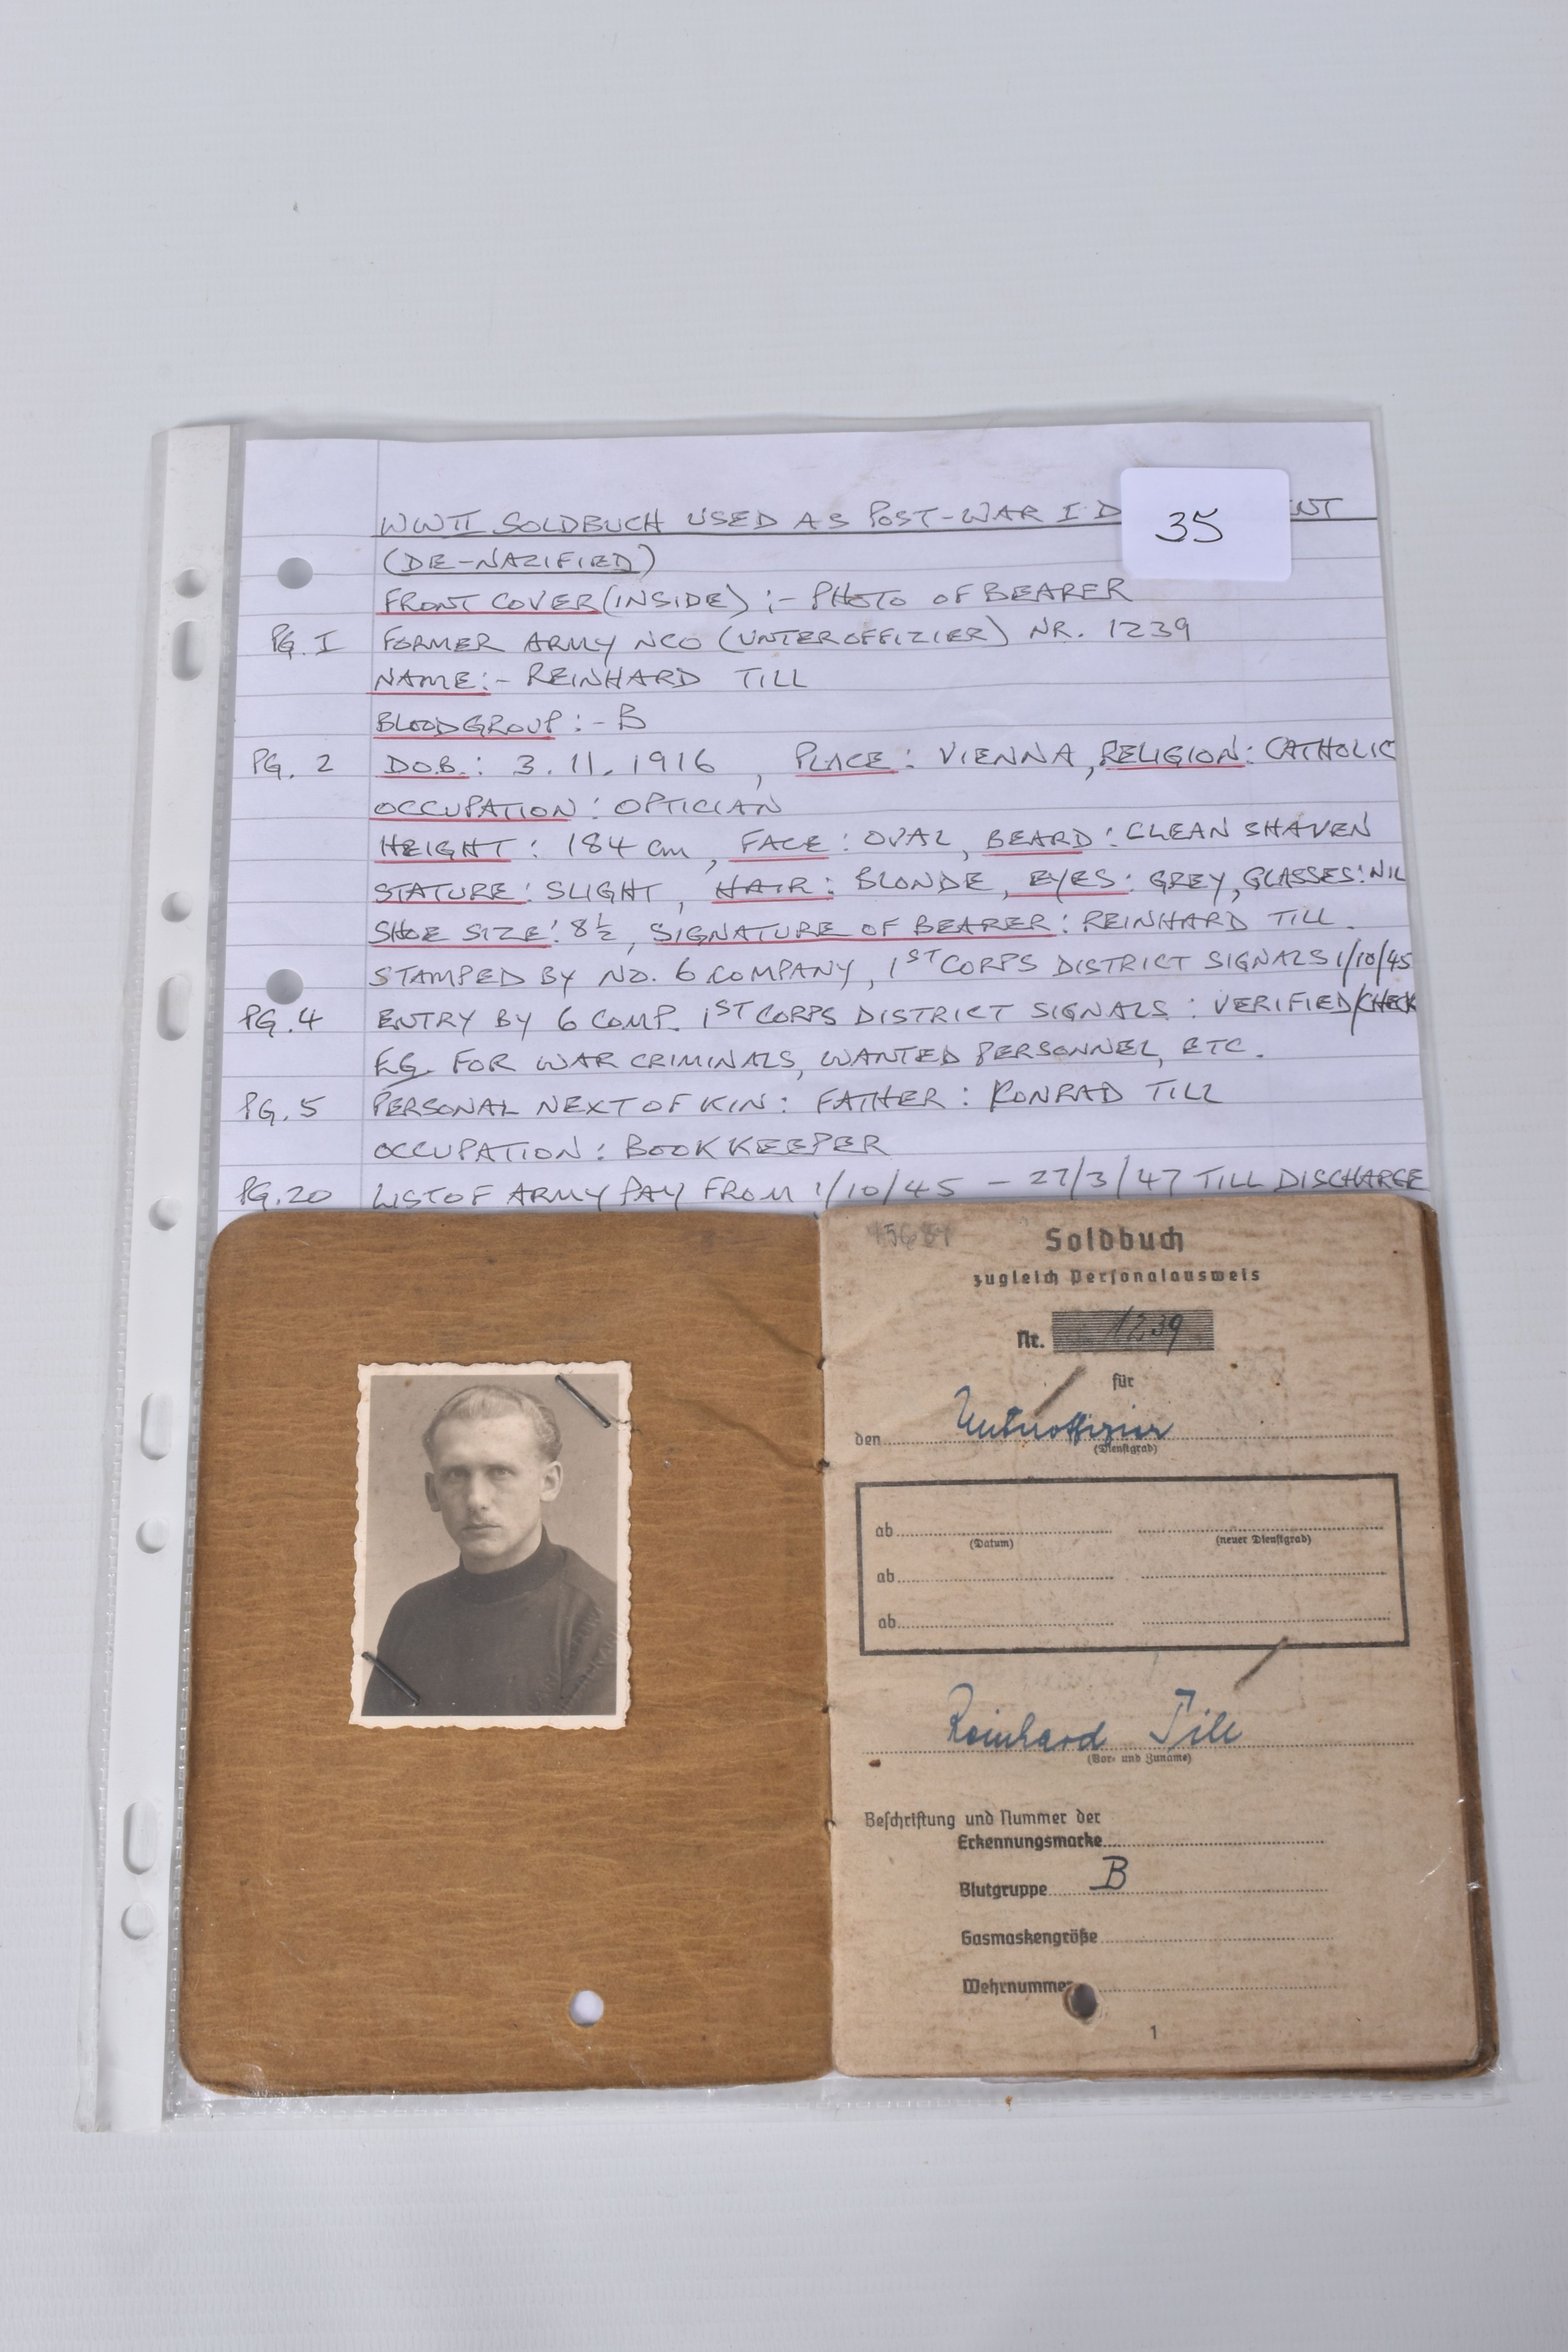 WWII SOLDBUCH USED AS POST-WAR ID DOCUMENT FOR REINHARD TILL, DOB 03/11/1916, place: Vienna,